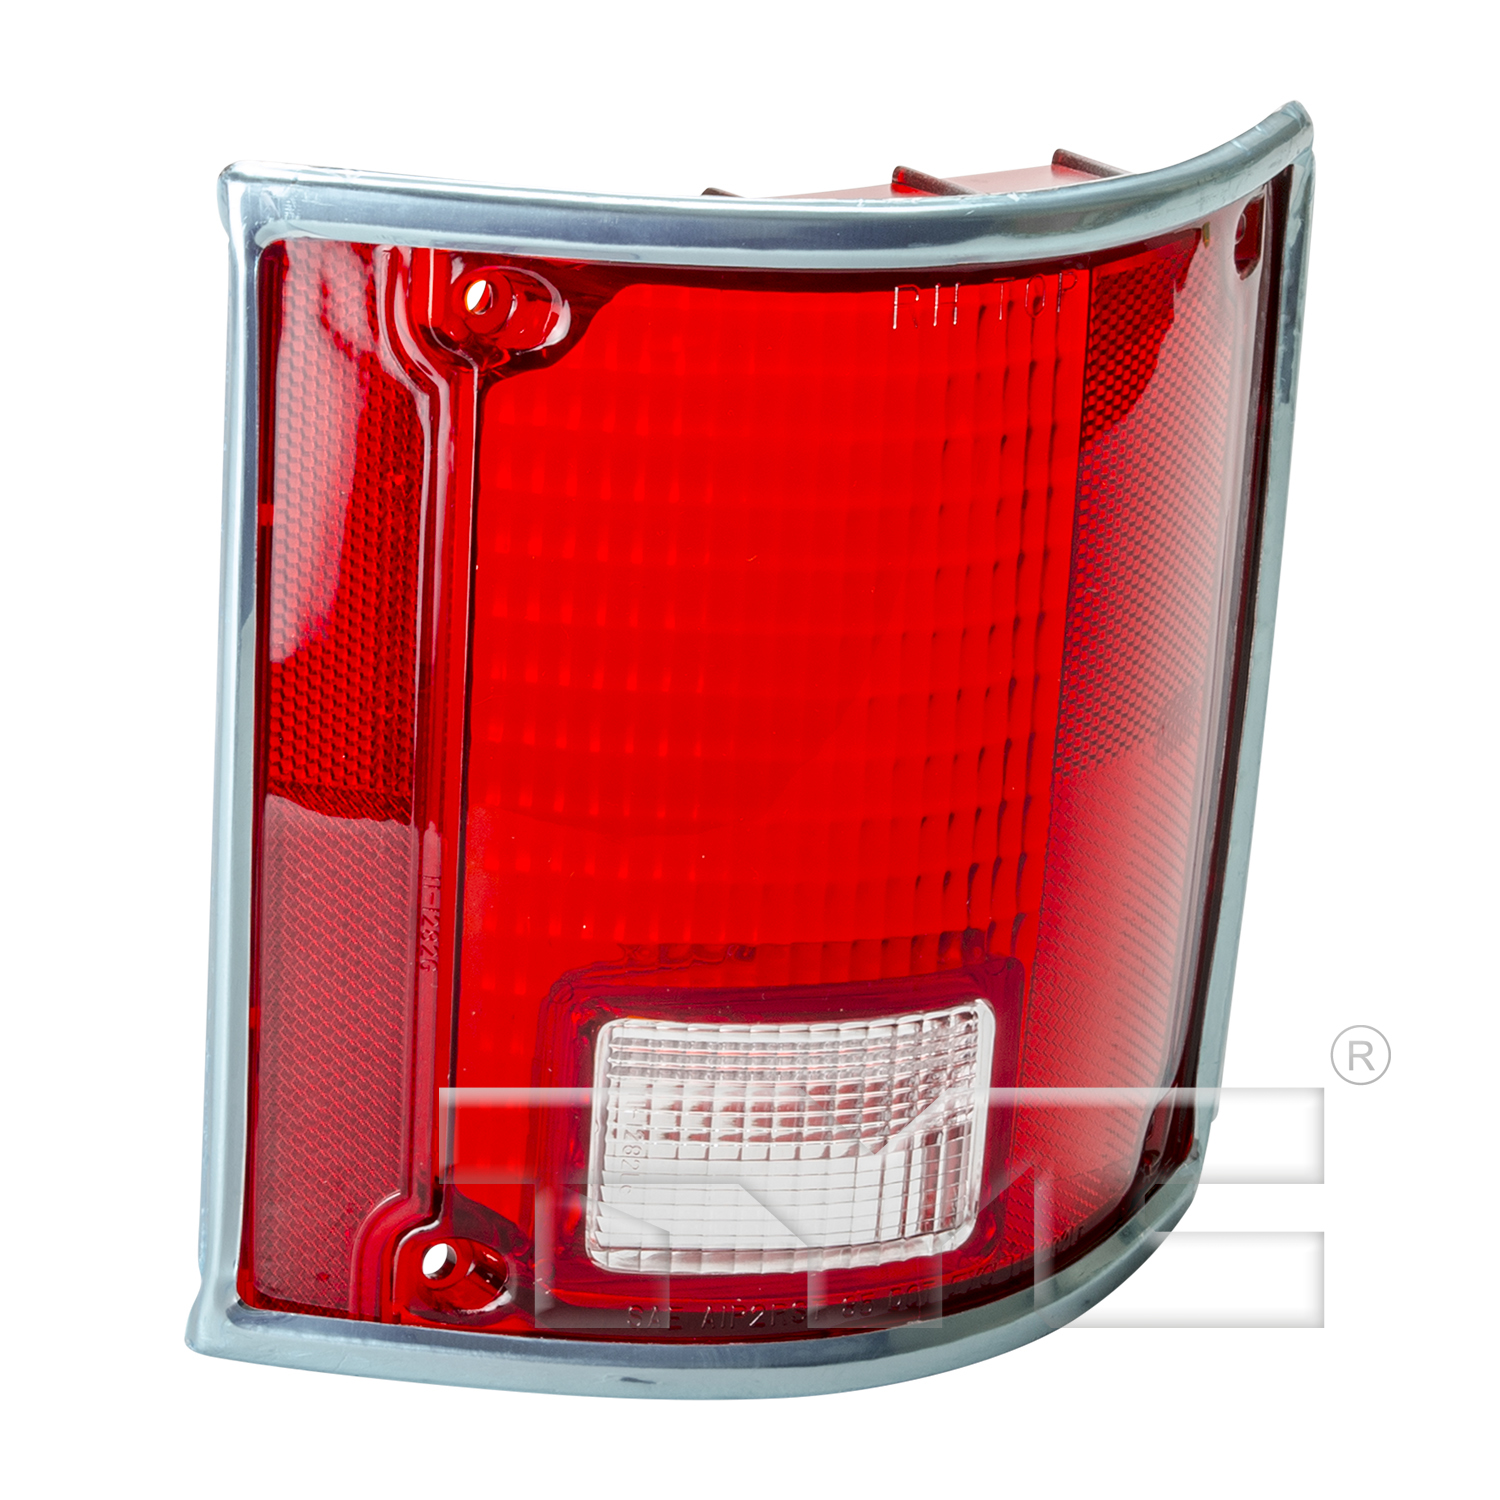 Aftermarket TAILLIGHTS for CHEVROLET - C10, C10,75-86,RT Taillamp lens